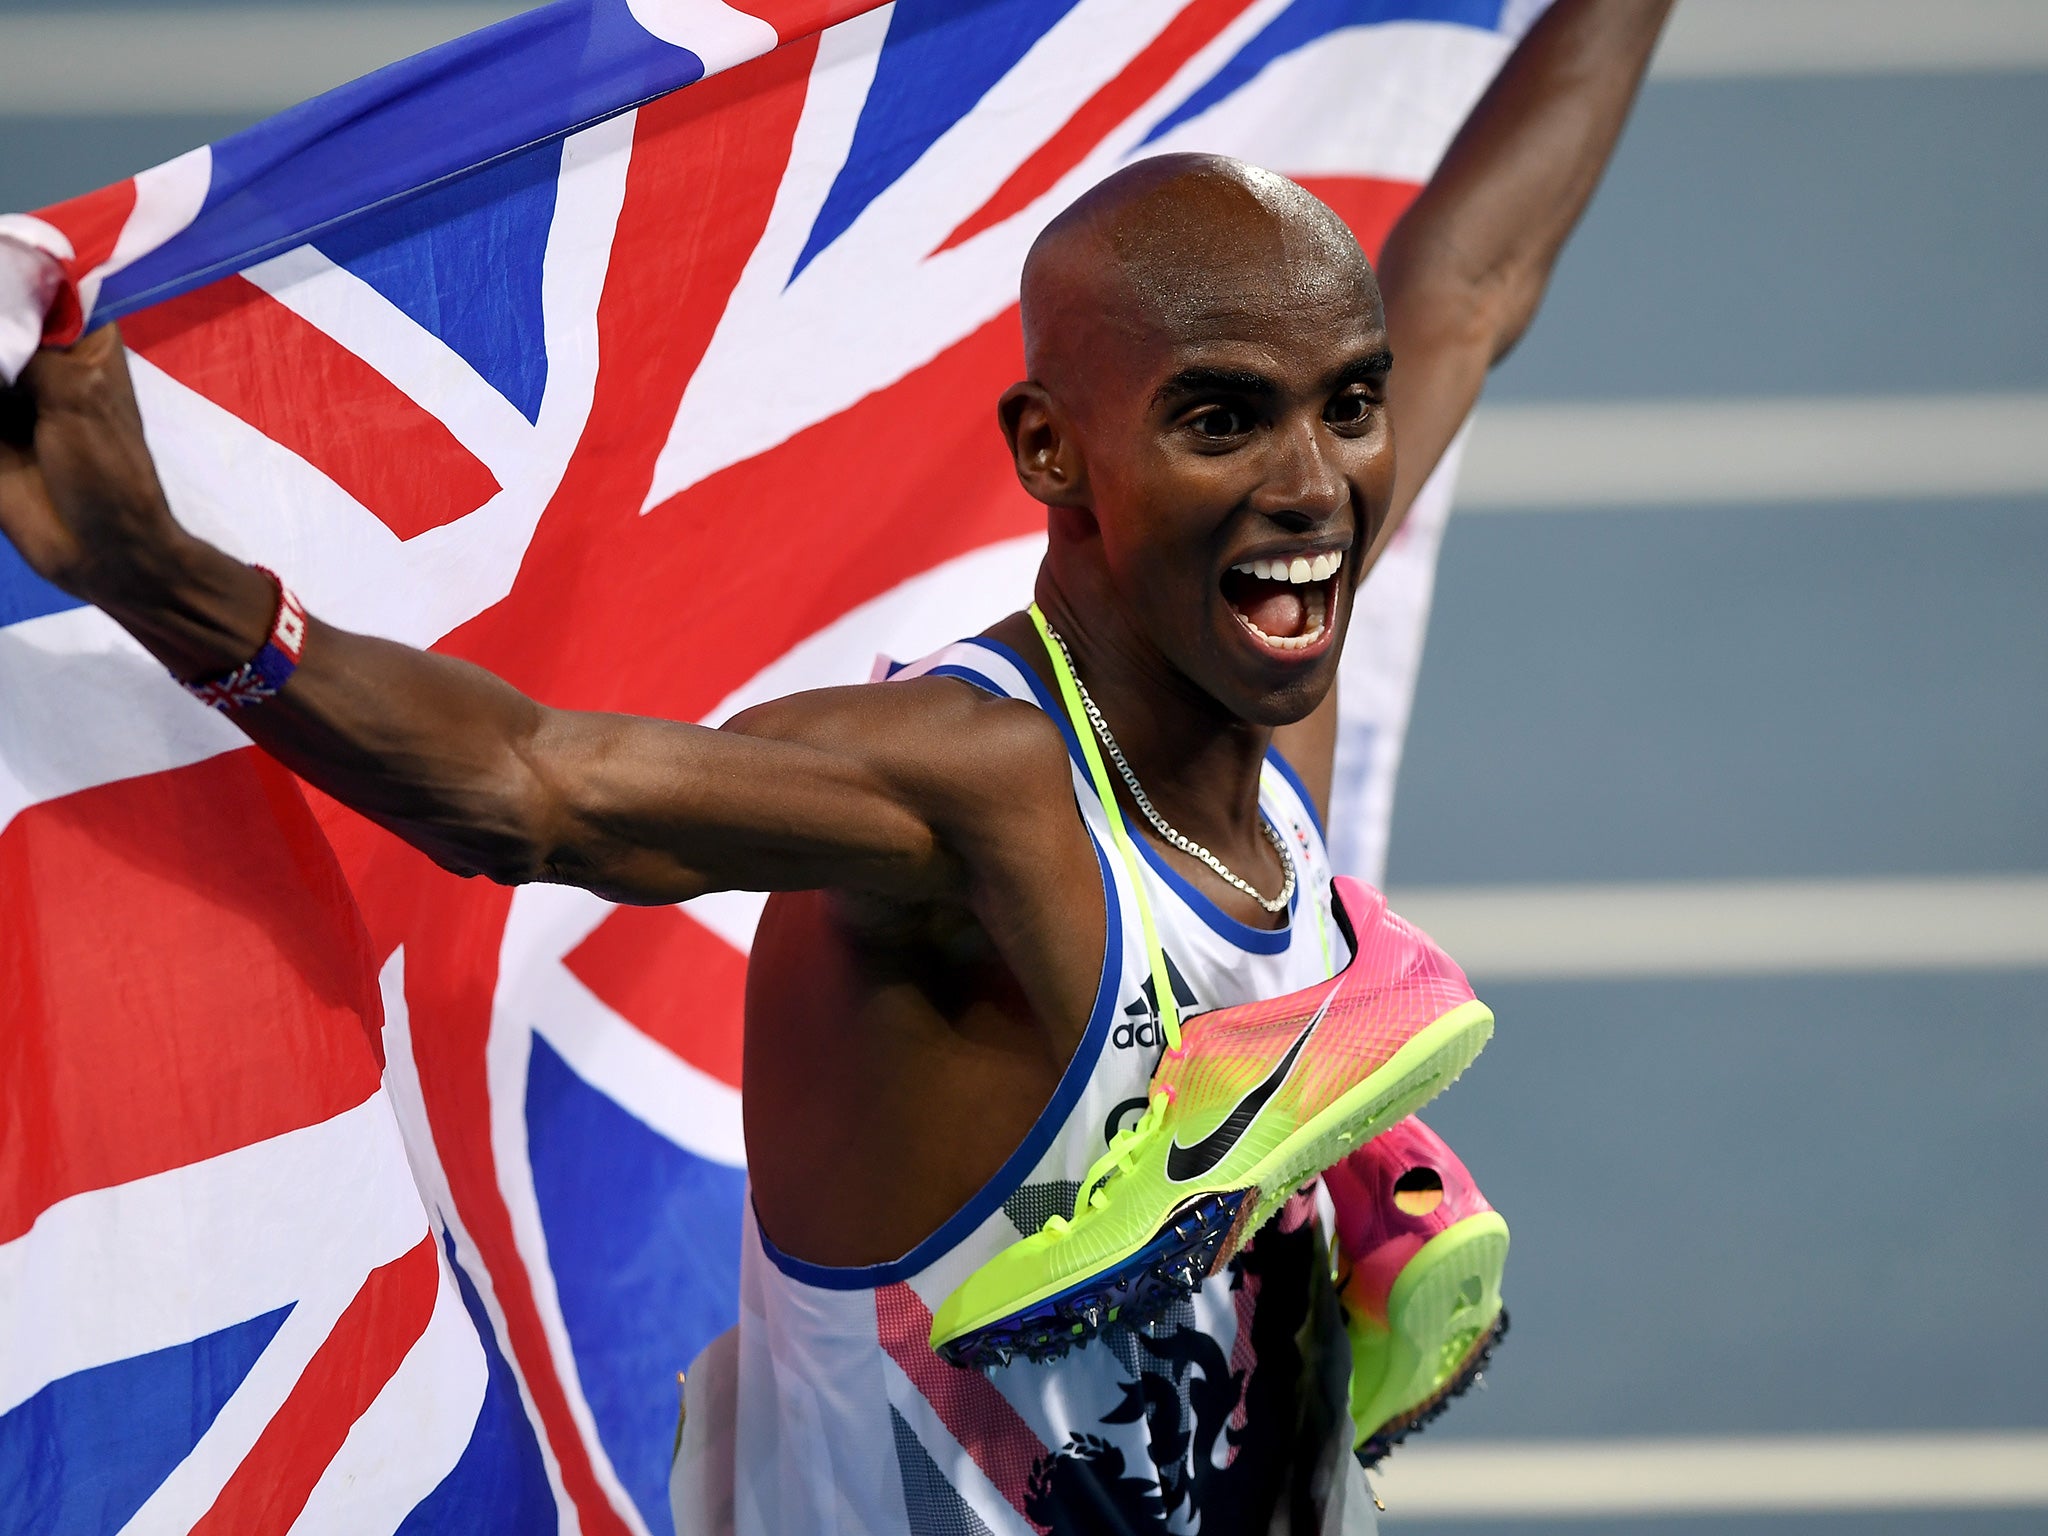 Farah celebrates with a Union Jack after his 5,000m win